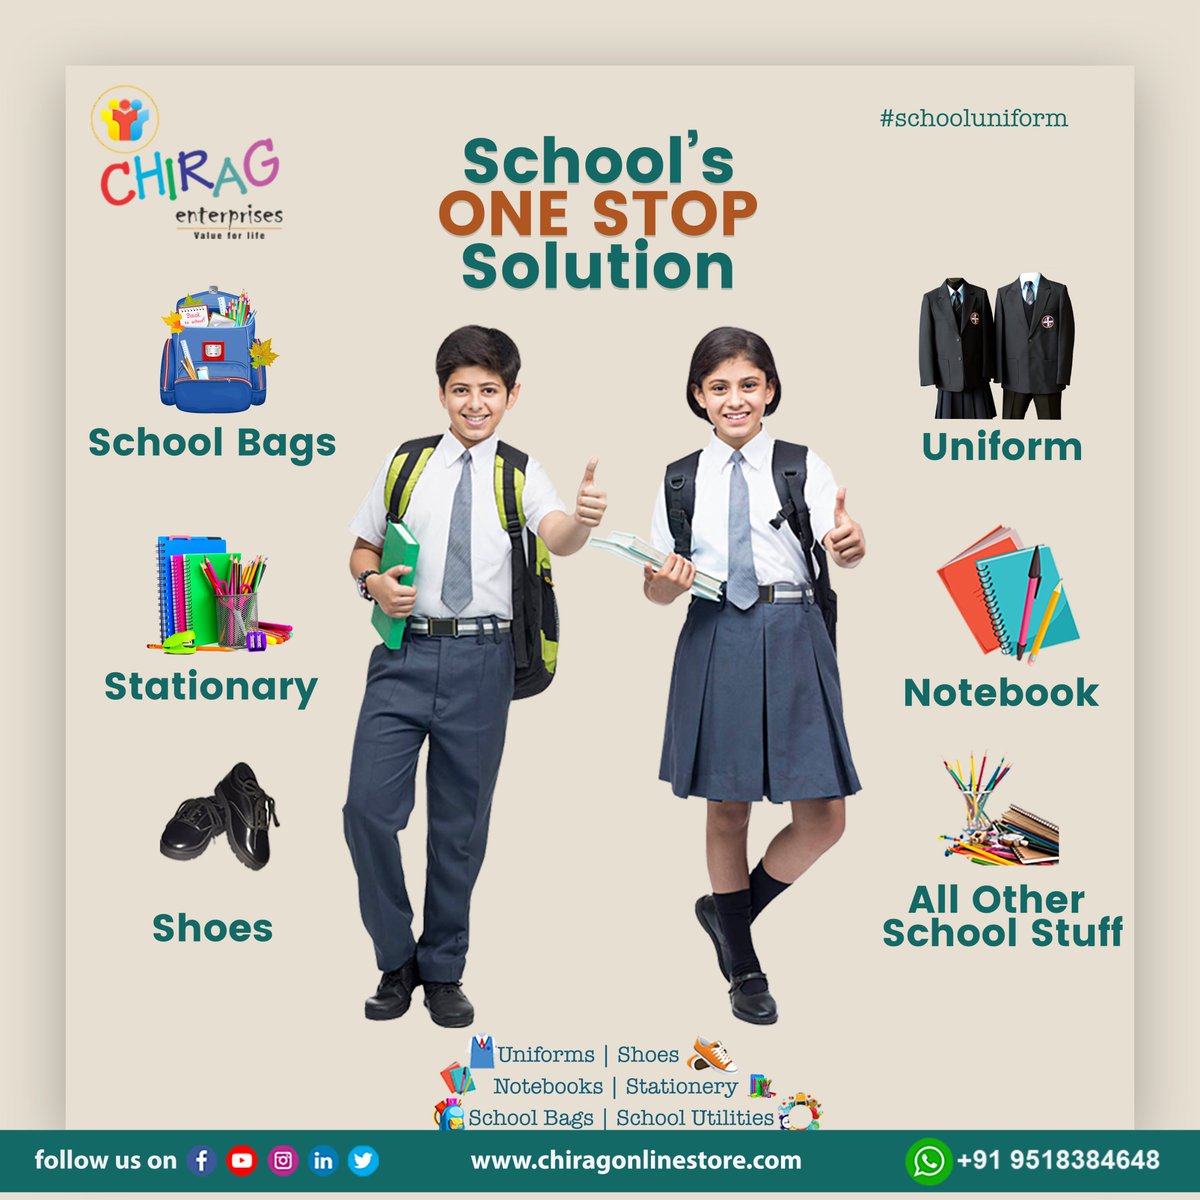 Once we know better, We should choose better.
We provide all school uniforms with best quality.
.
👉Visit: chiragonlinestore.com
Call:9518384648/ 9420549798
.
#schooluniform #school #schoolwear #girlswearpantstoo #tshirt #schooluniform #uniform #embroidery #polo #manufacturer